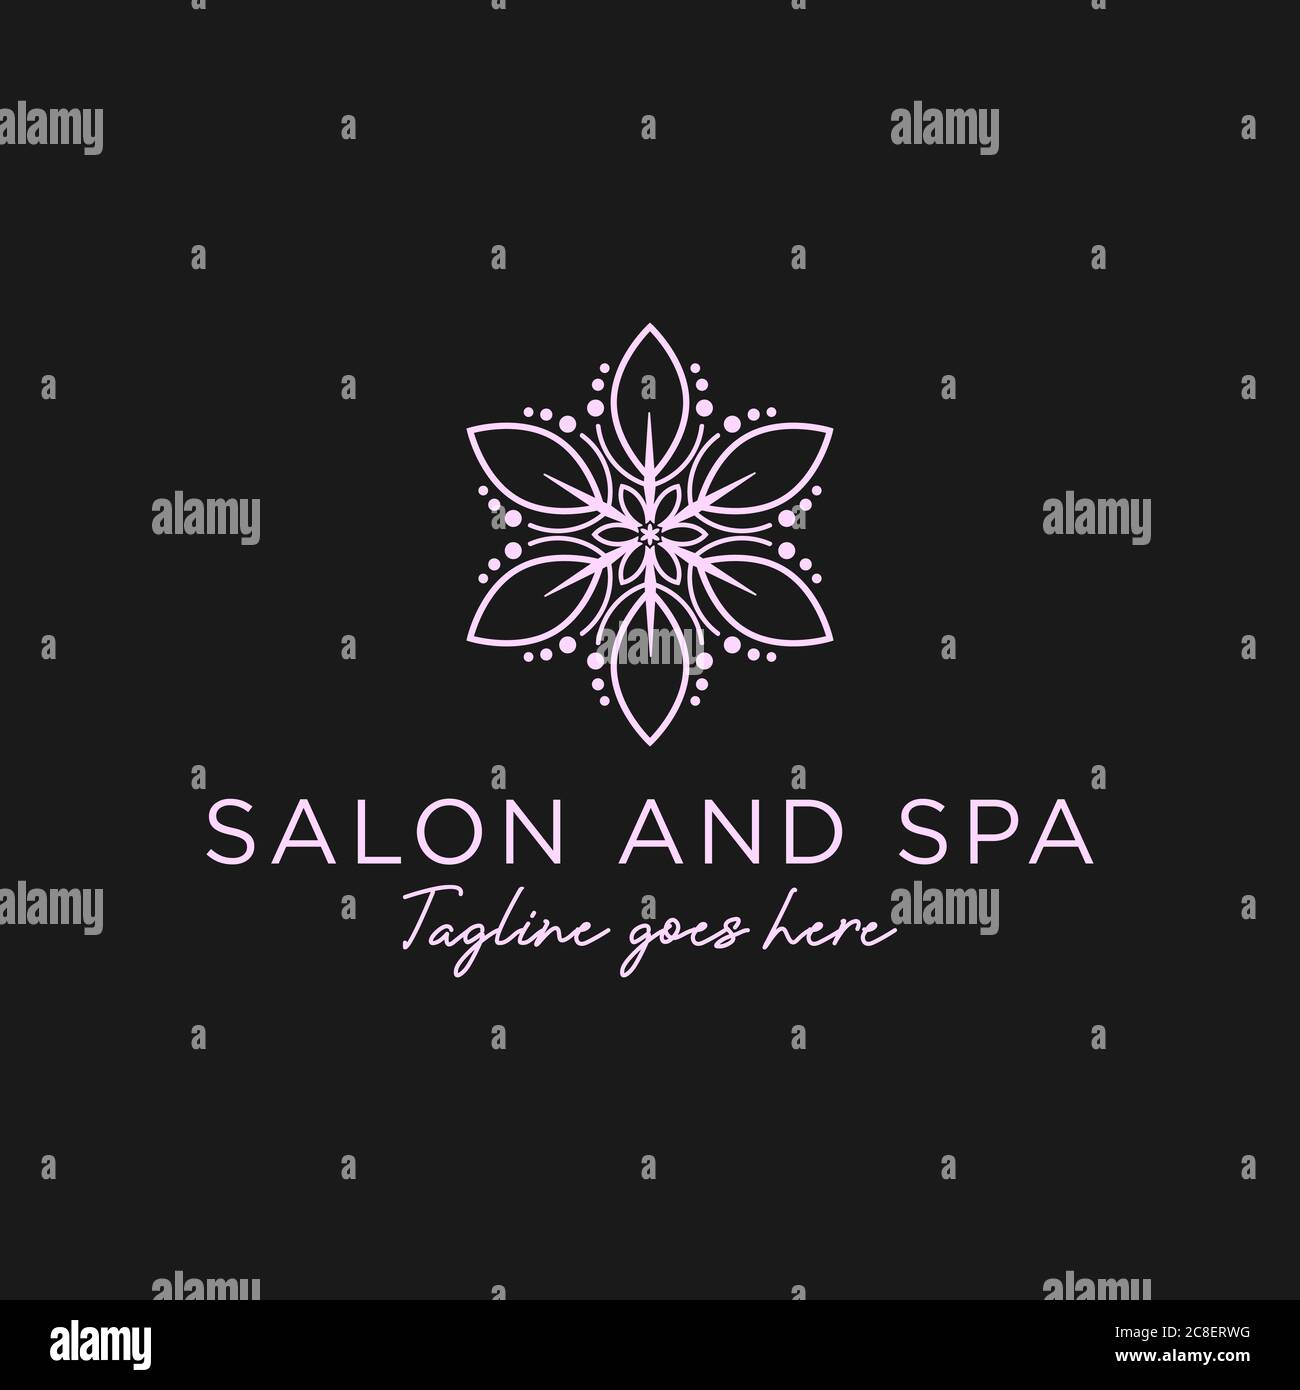 Salon and SPA Logo vector logo for Beauty woman and relaxation treatments, abstract female fashion logo design template Stock Vector